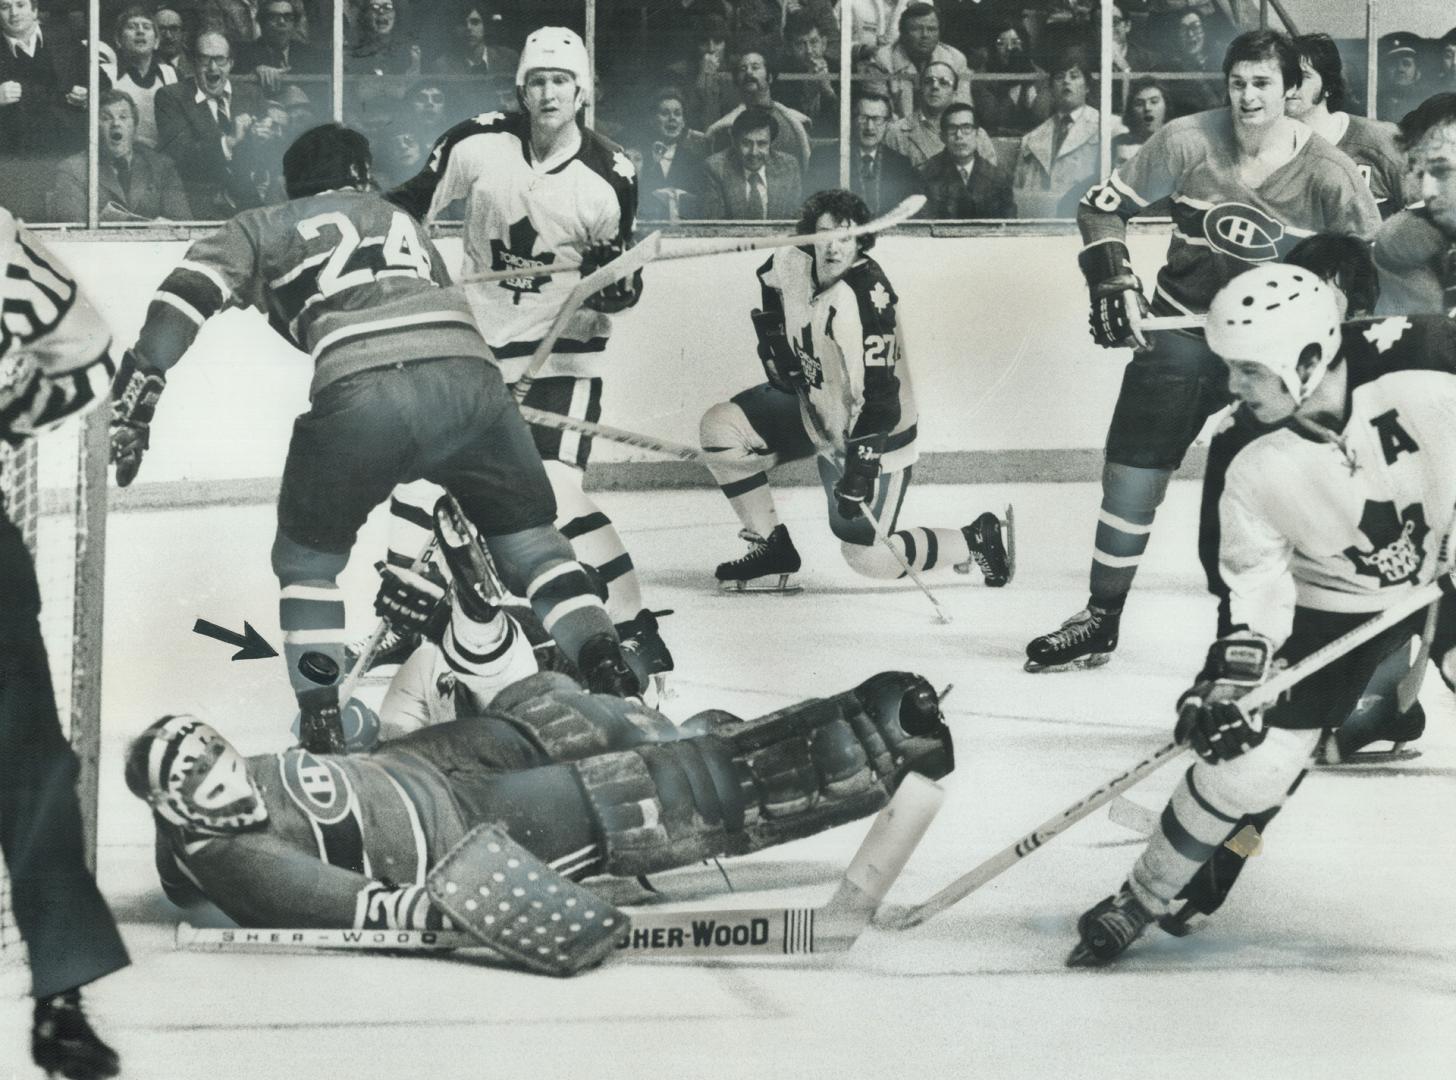 Flat on his back, Montreal Canadiens' goalie Ken Dryden is helpless to prevent puck (see arrow) fired by Leafs' Ron Ellis (right) from entering net wi(...)